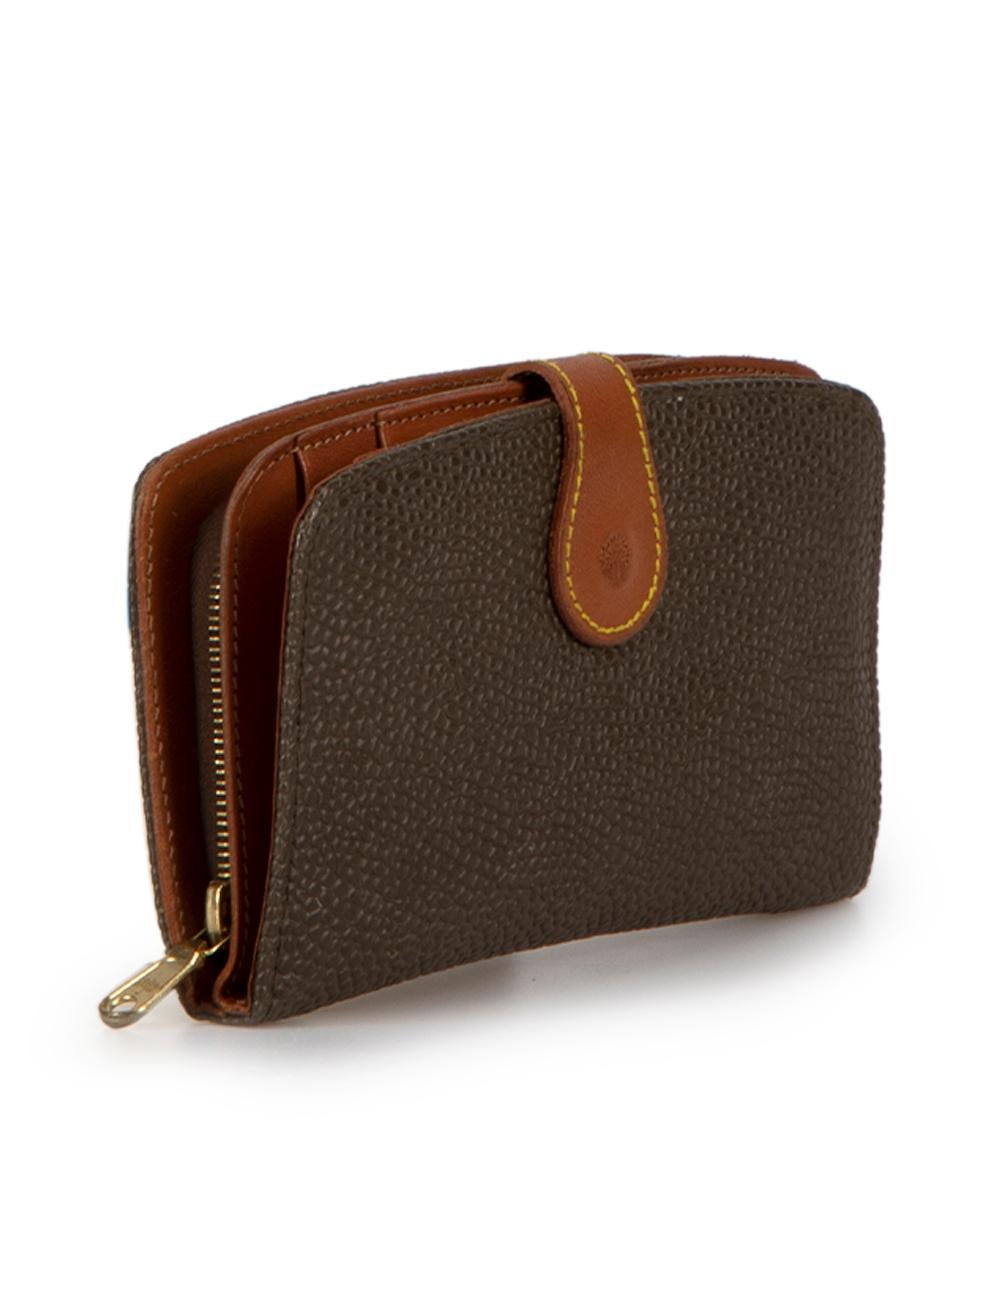 CONDITION is Very good. Minimal wear to purse is evident. Minimal wear to the zip hardware with tarnishing and small scuffs to the lining on this used Mulberry designer resale item. 



Details


Brown

Leather

Bi-fold wallet

Scotchgrain

Snap